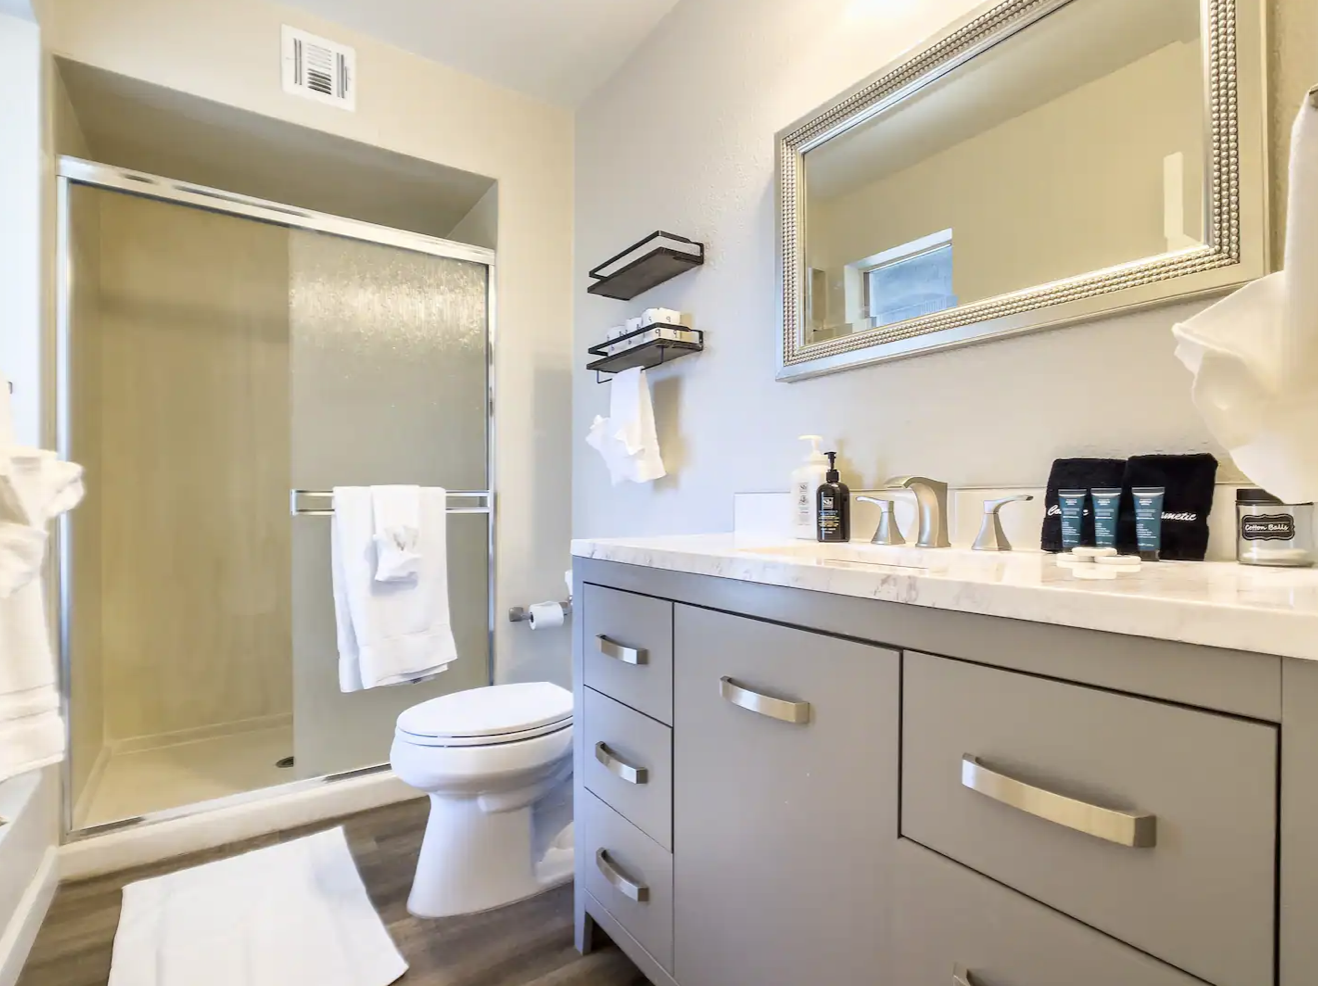 Two full bathrooms are stocked with items including: shampoo, conditioner, body wash, and fresh towels.